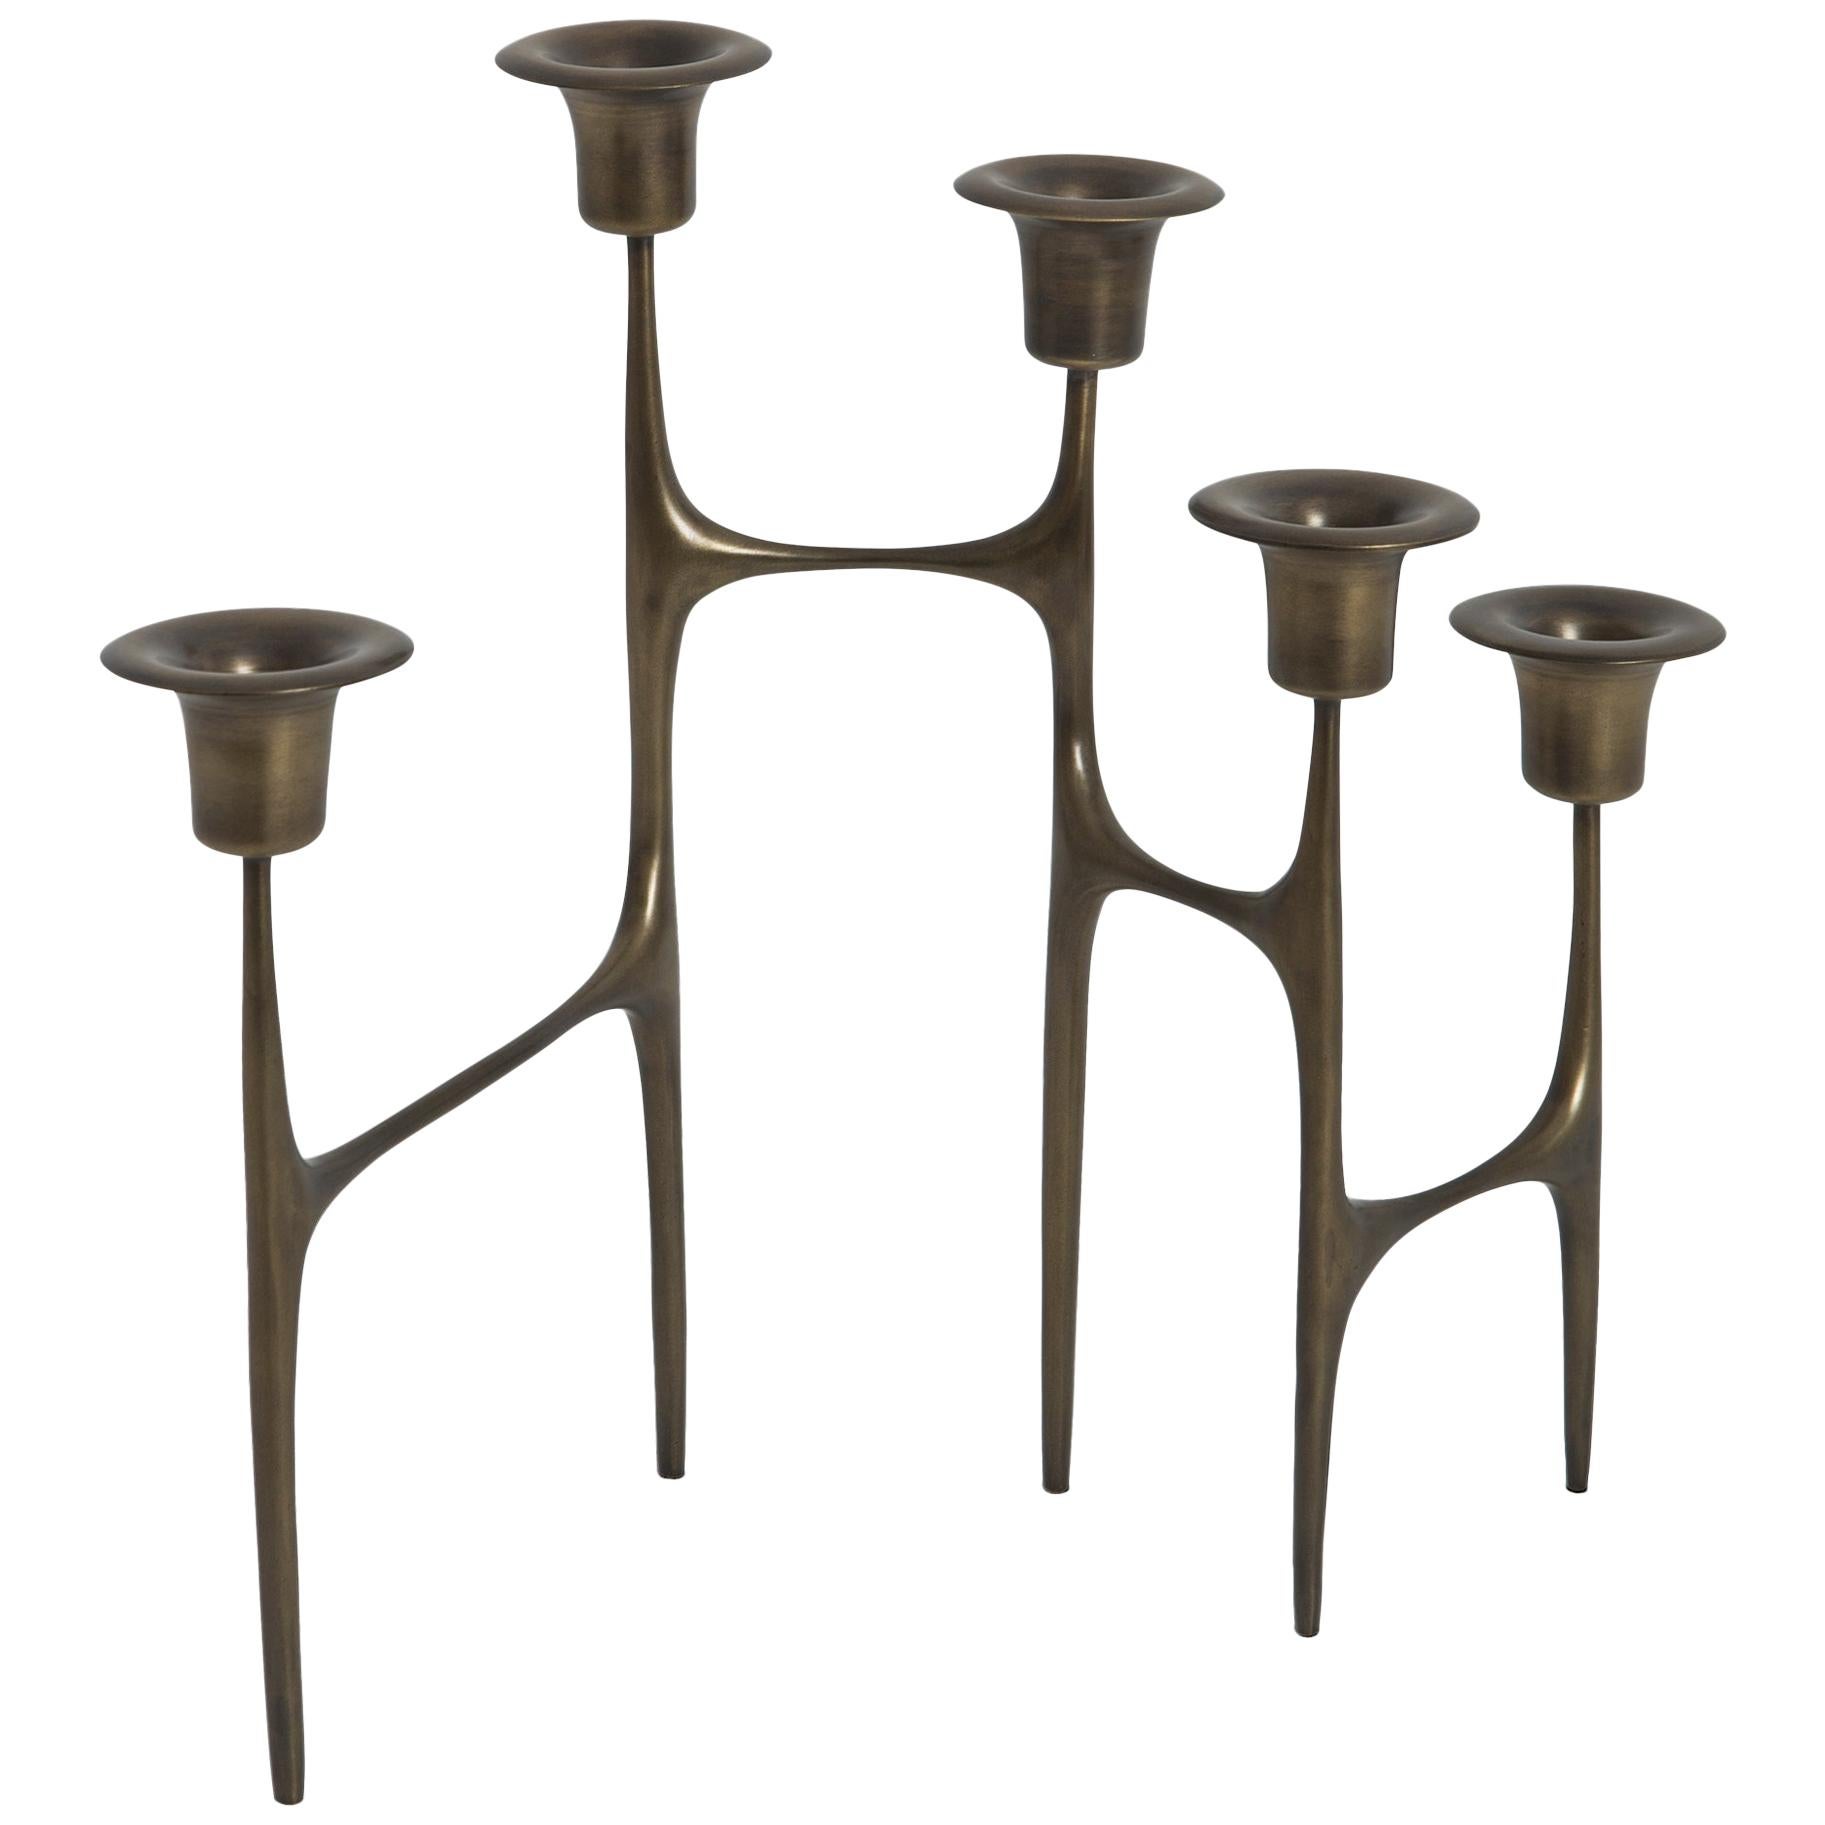 Five Flames Candleholder For Sale